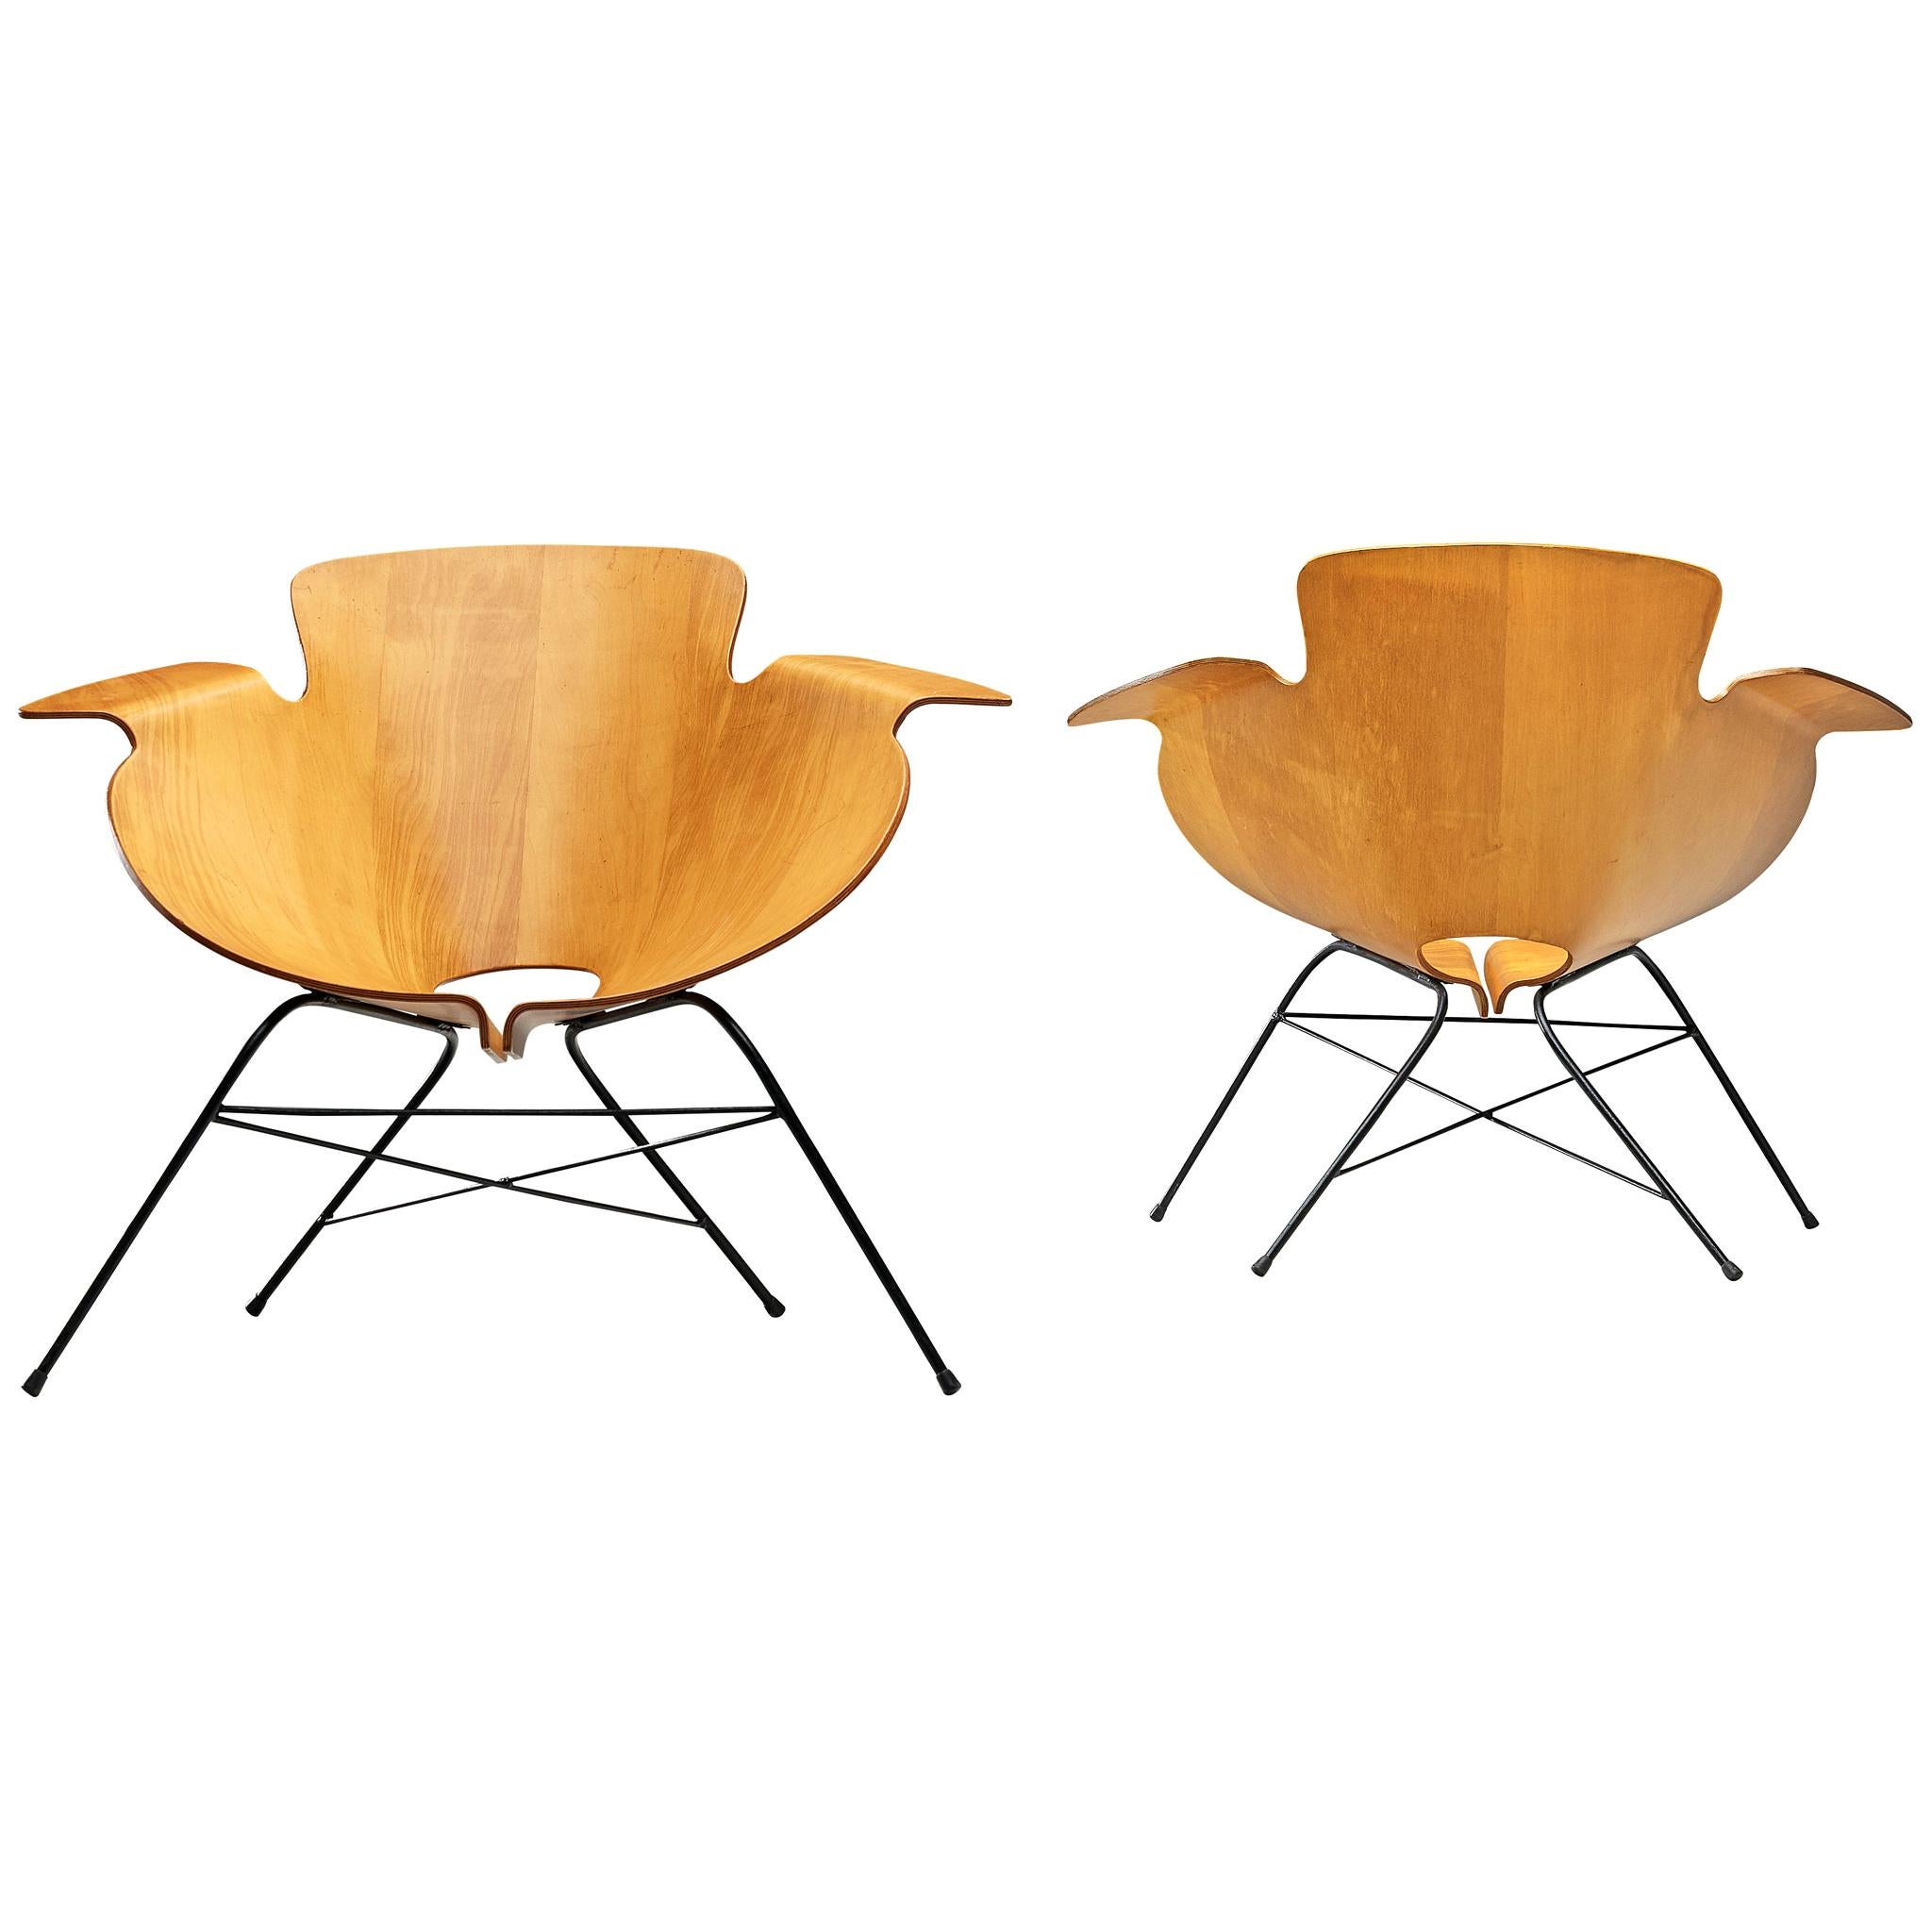 Pair of Italian Plywood Chairs, 1960s